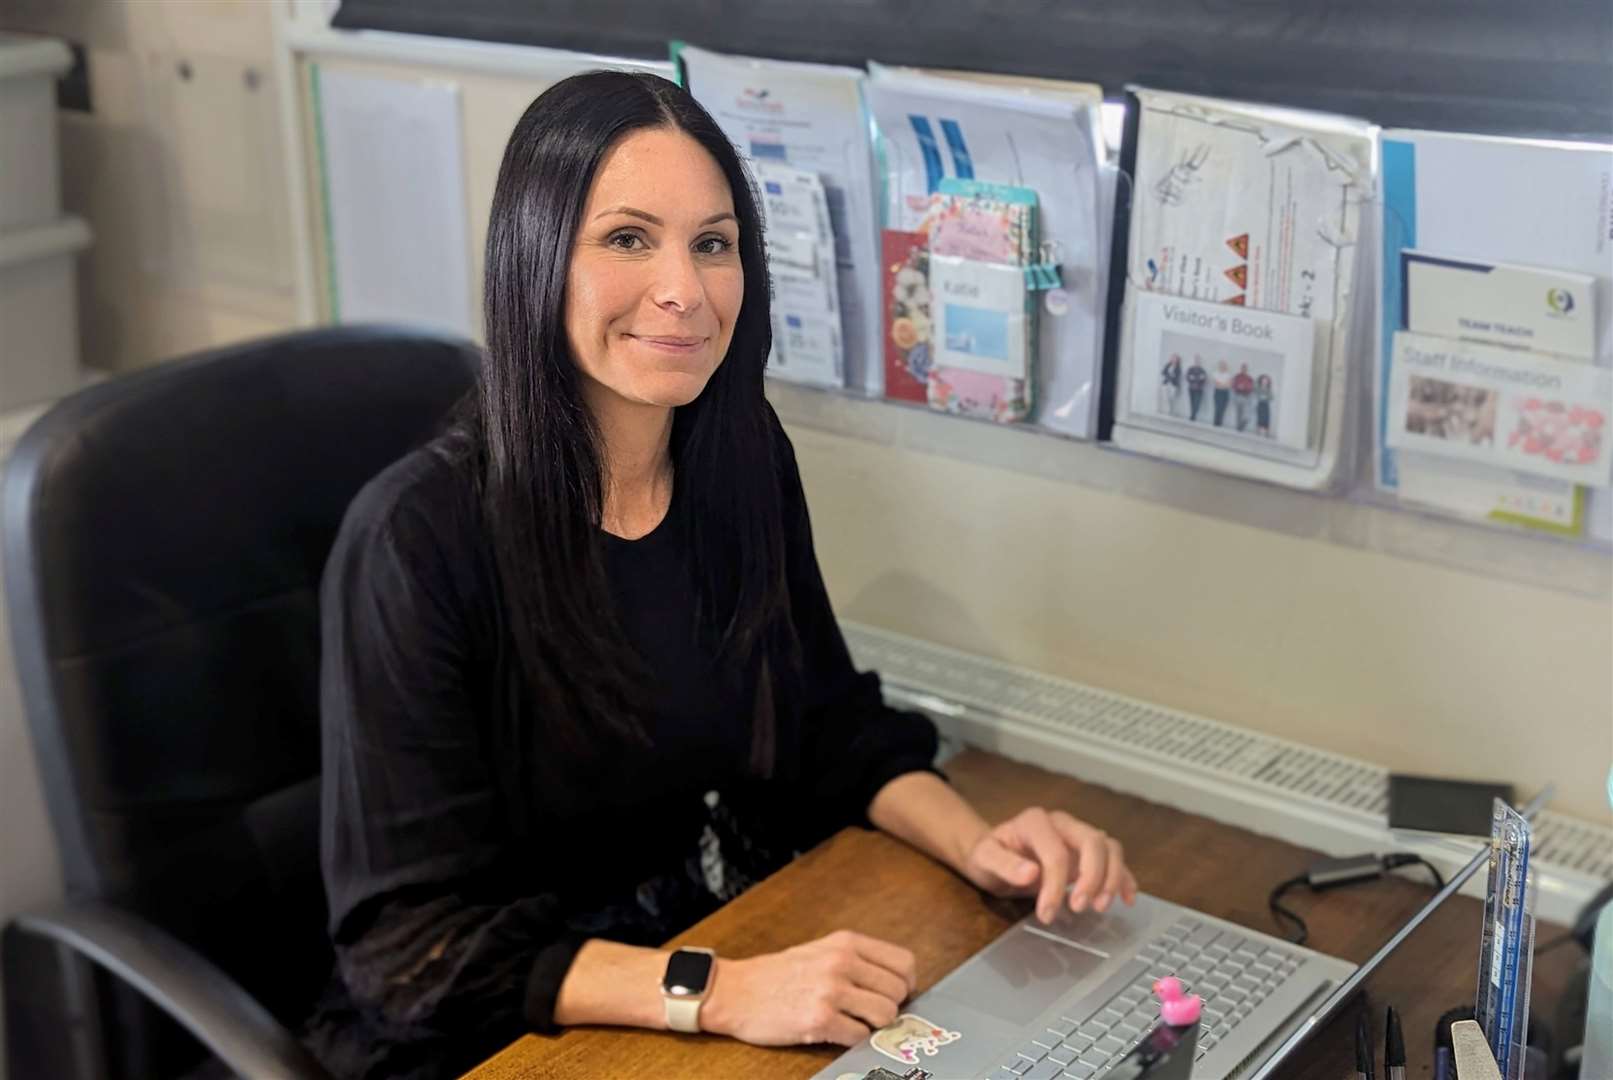 Katie Smissen is the registered manager at Walmer View children’s home